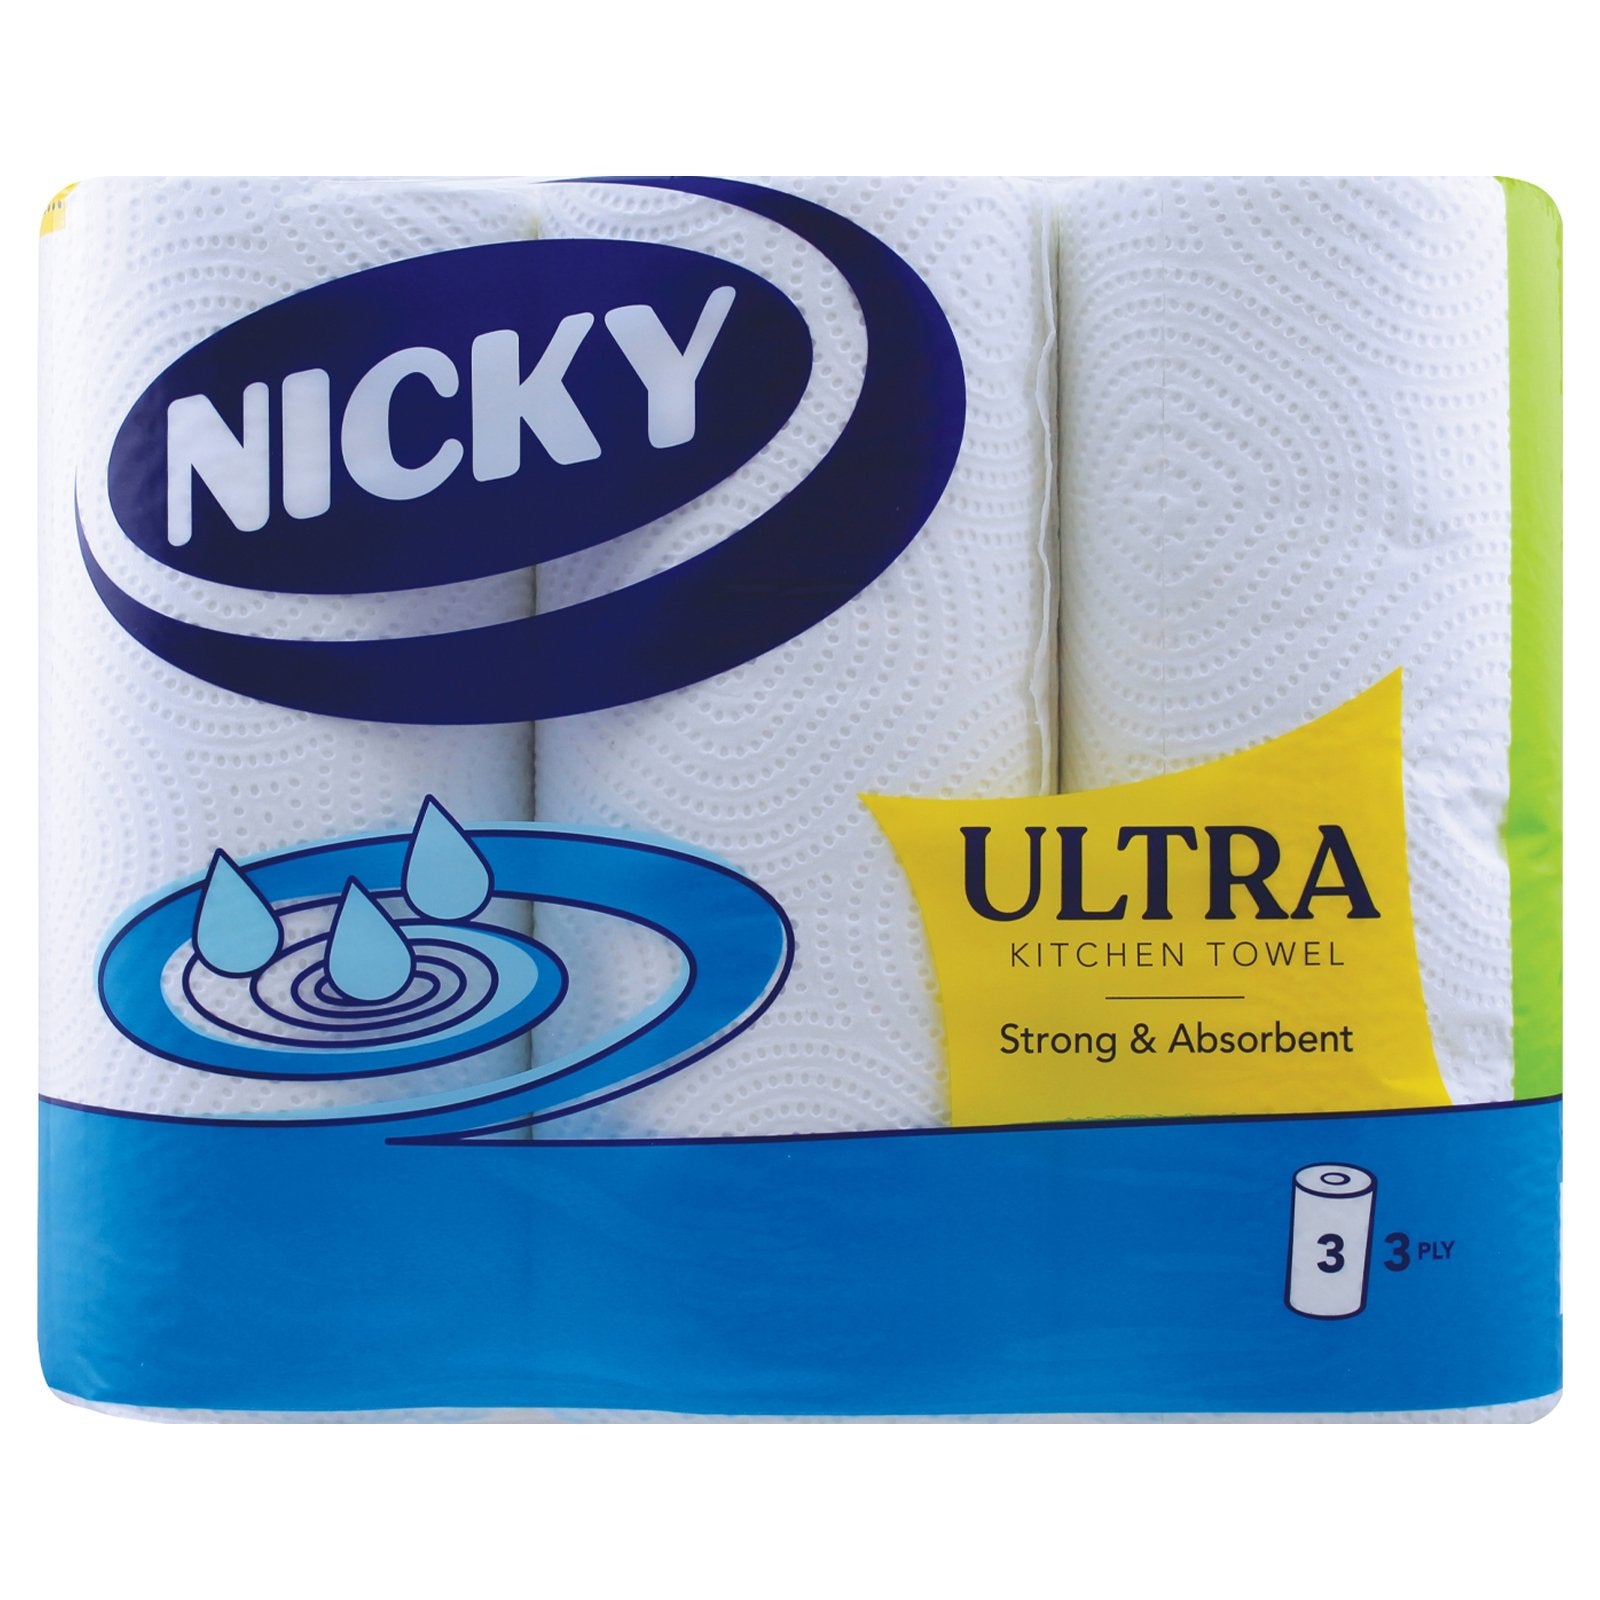 Nicky Ultra 3ply Kitchen Towel Roll -  3 Pack